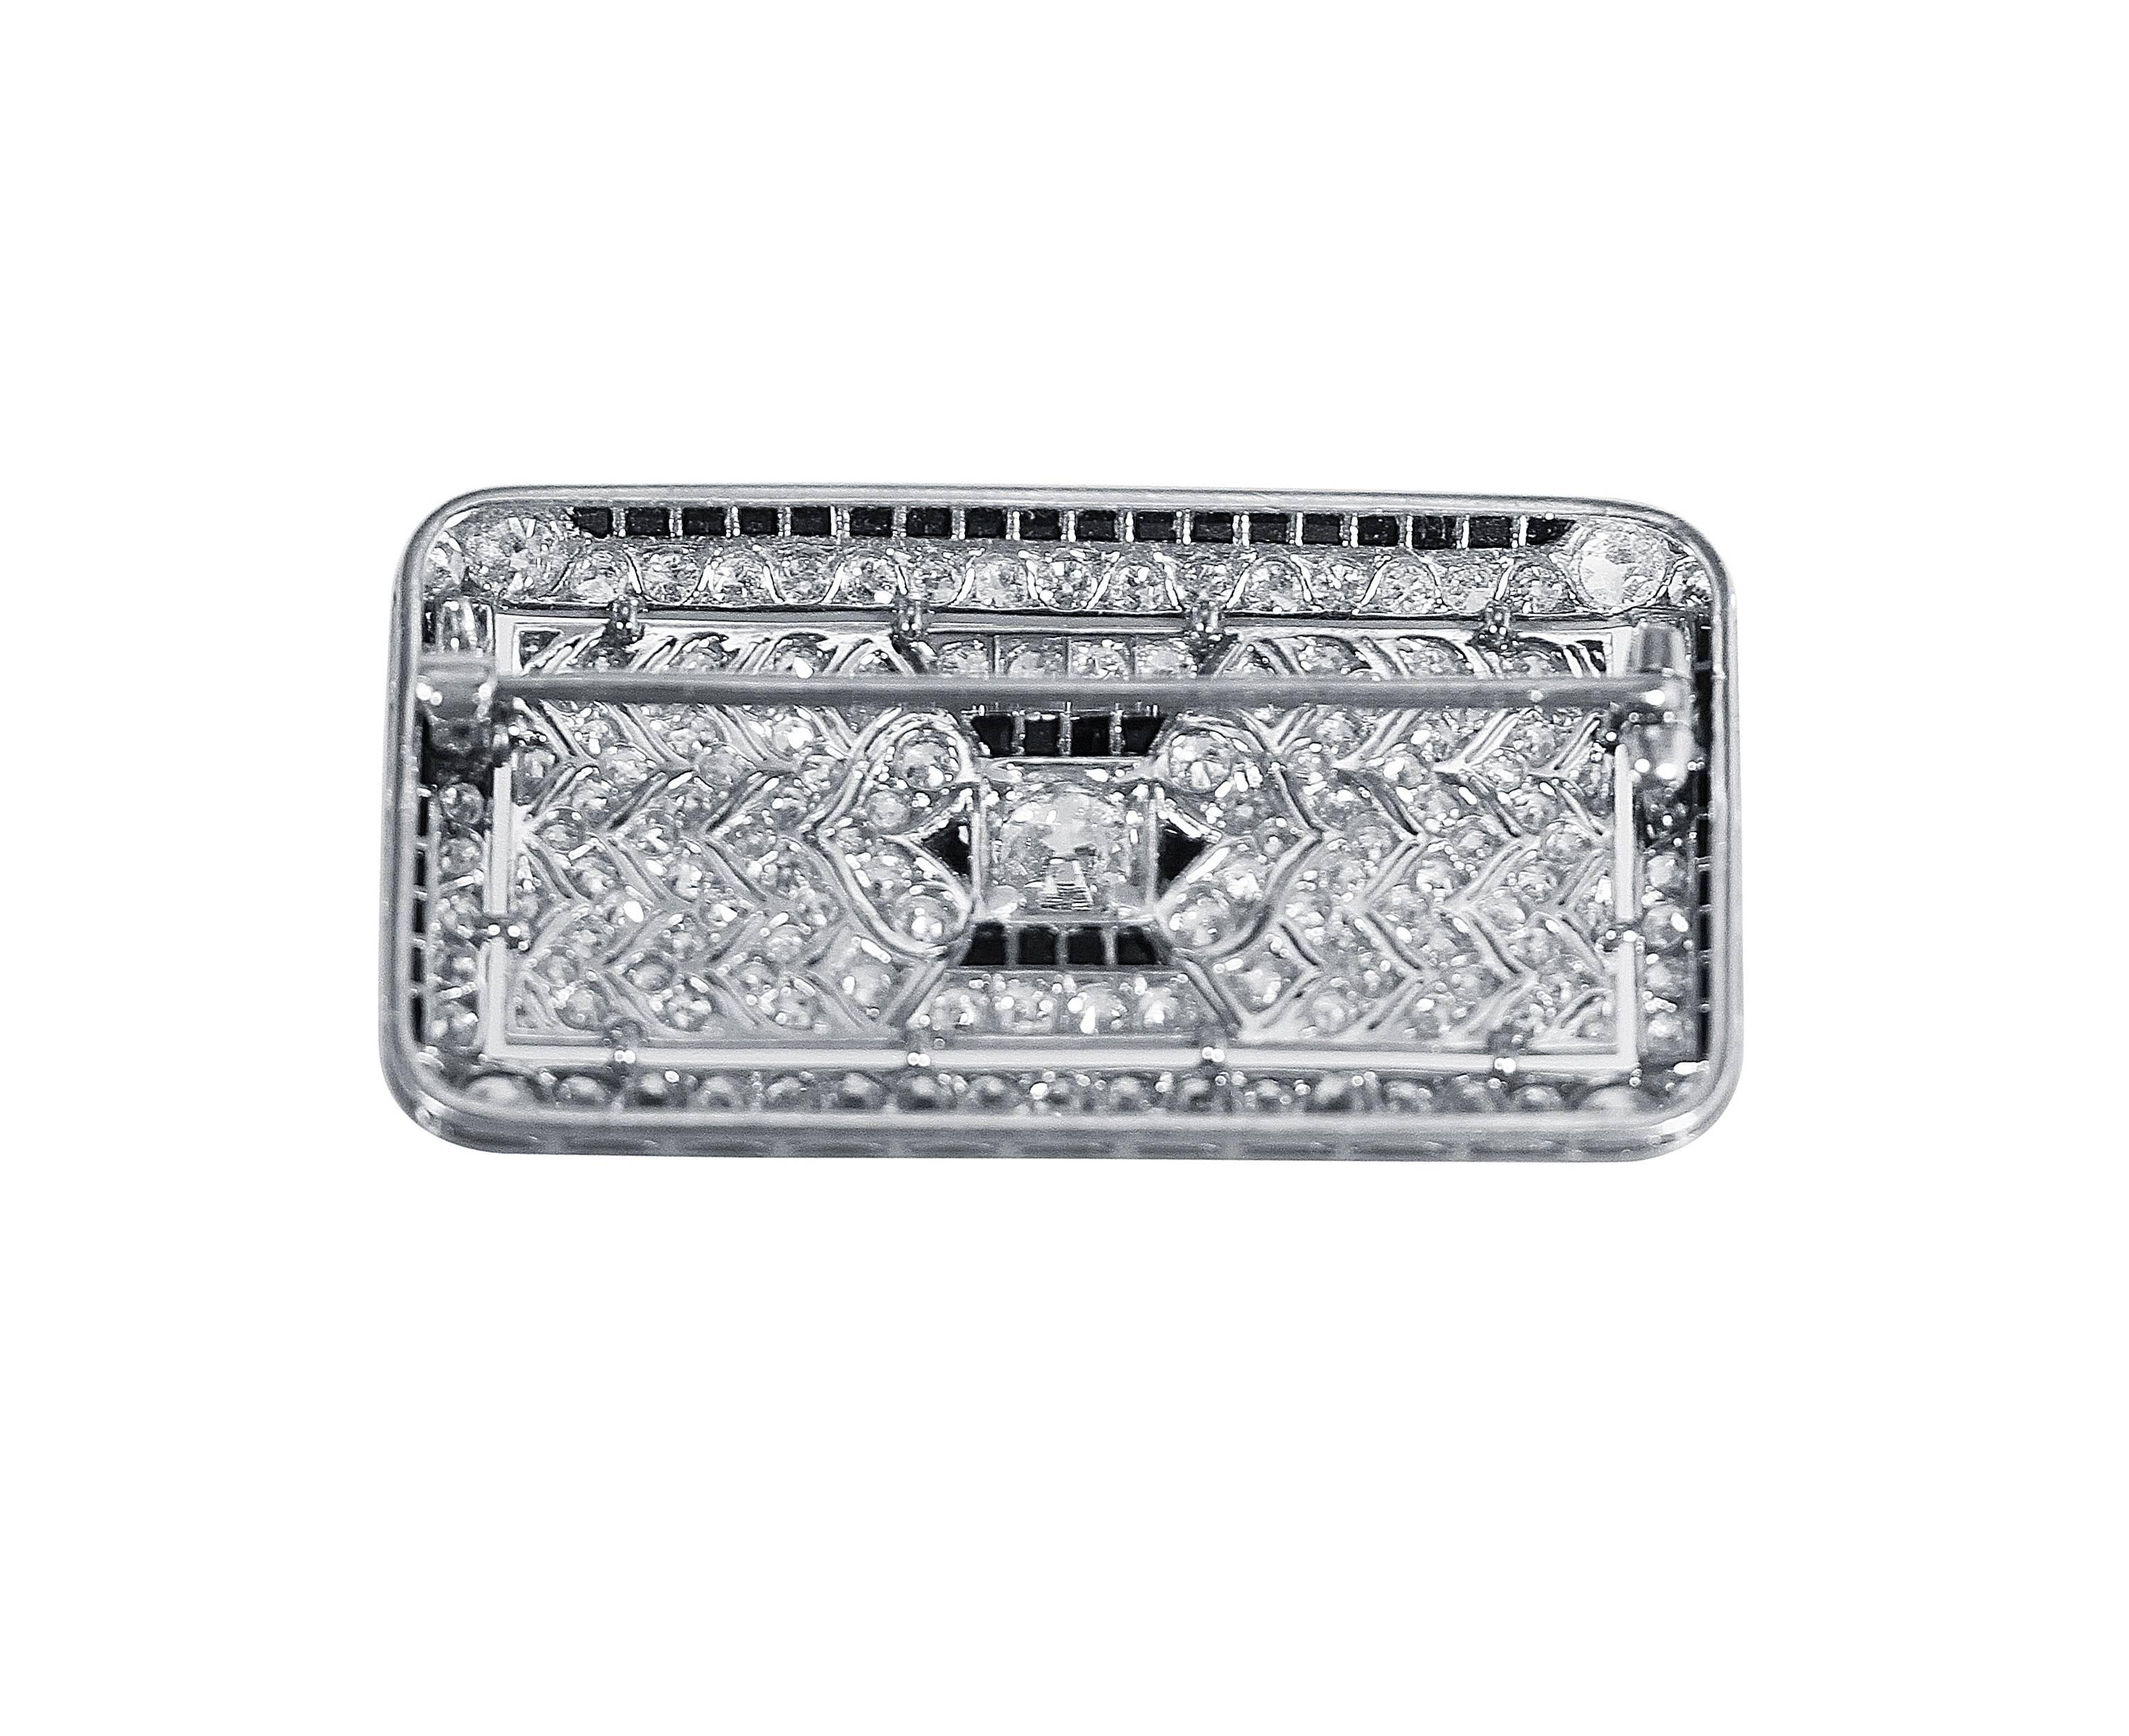 Art Deco Platinum, Diamond and Onyx Brooch by Cartier, 1924
• Unsigned, numbered 1637
• Accompanied by Cartier Valuation for Insurance stating that the brooch is by Cartier, New York, 1924
• 147 old cut round diamonds approximately 3.50 carats
•